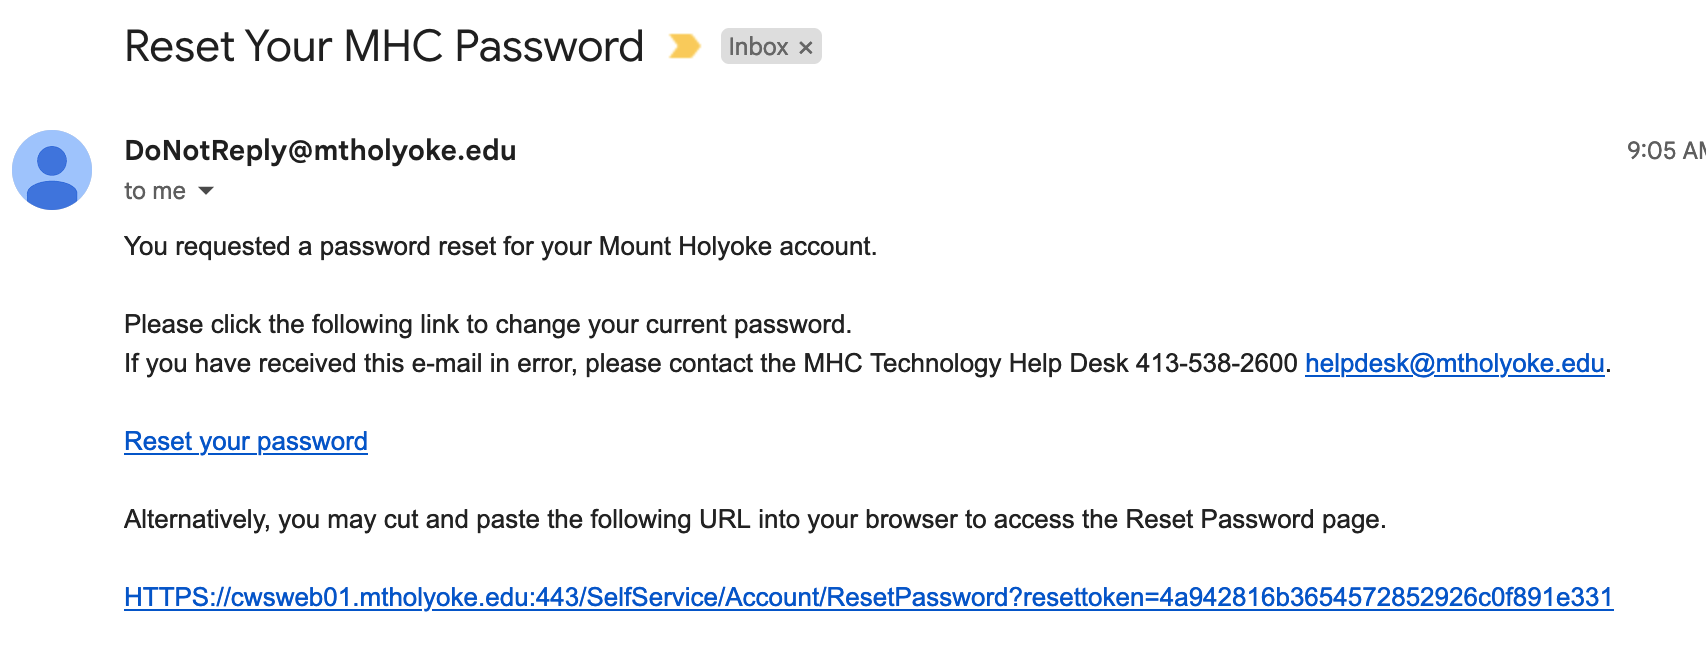 Reset your MHC password email